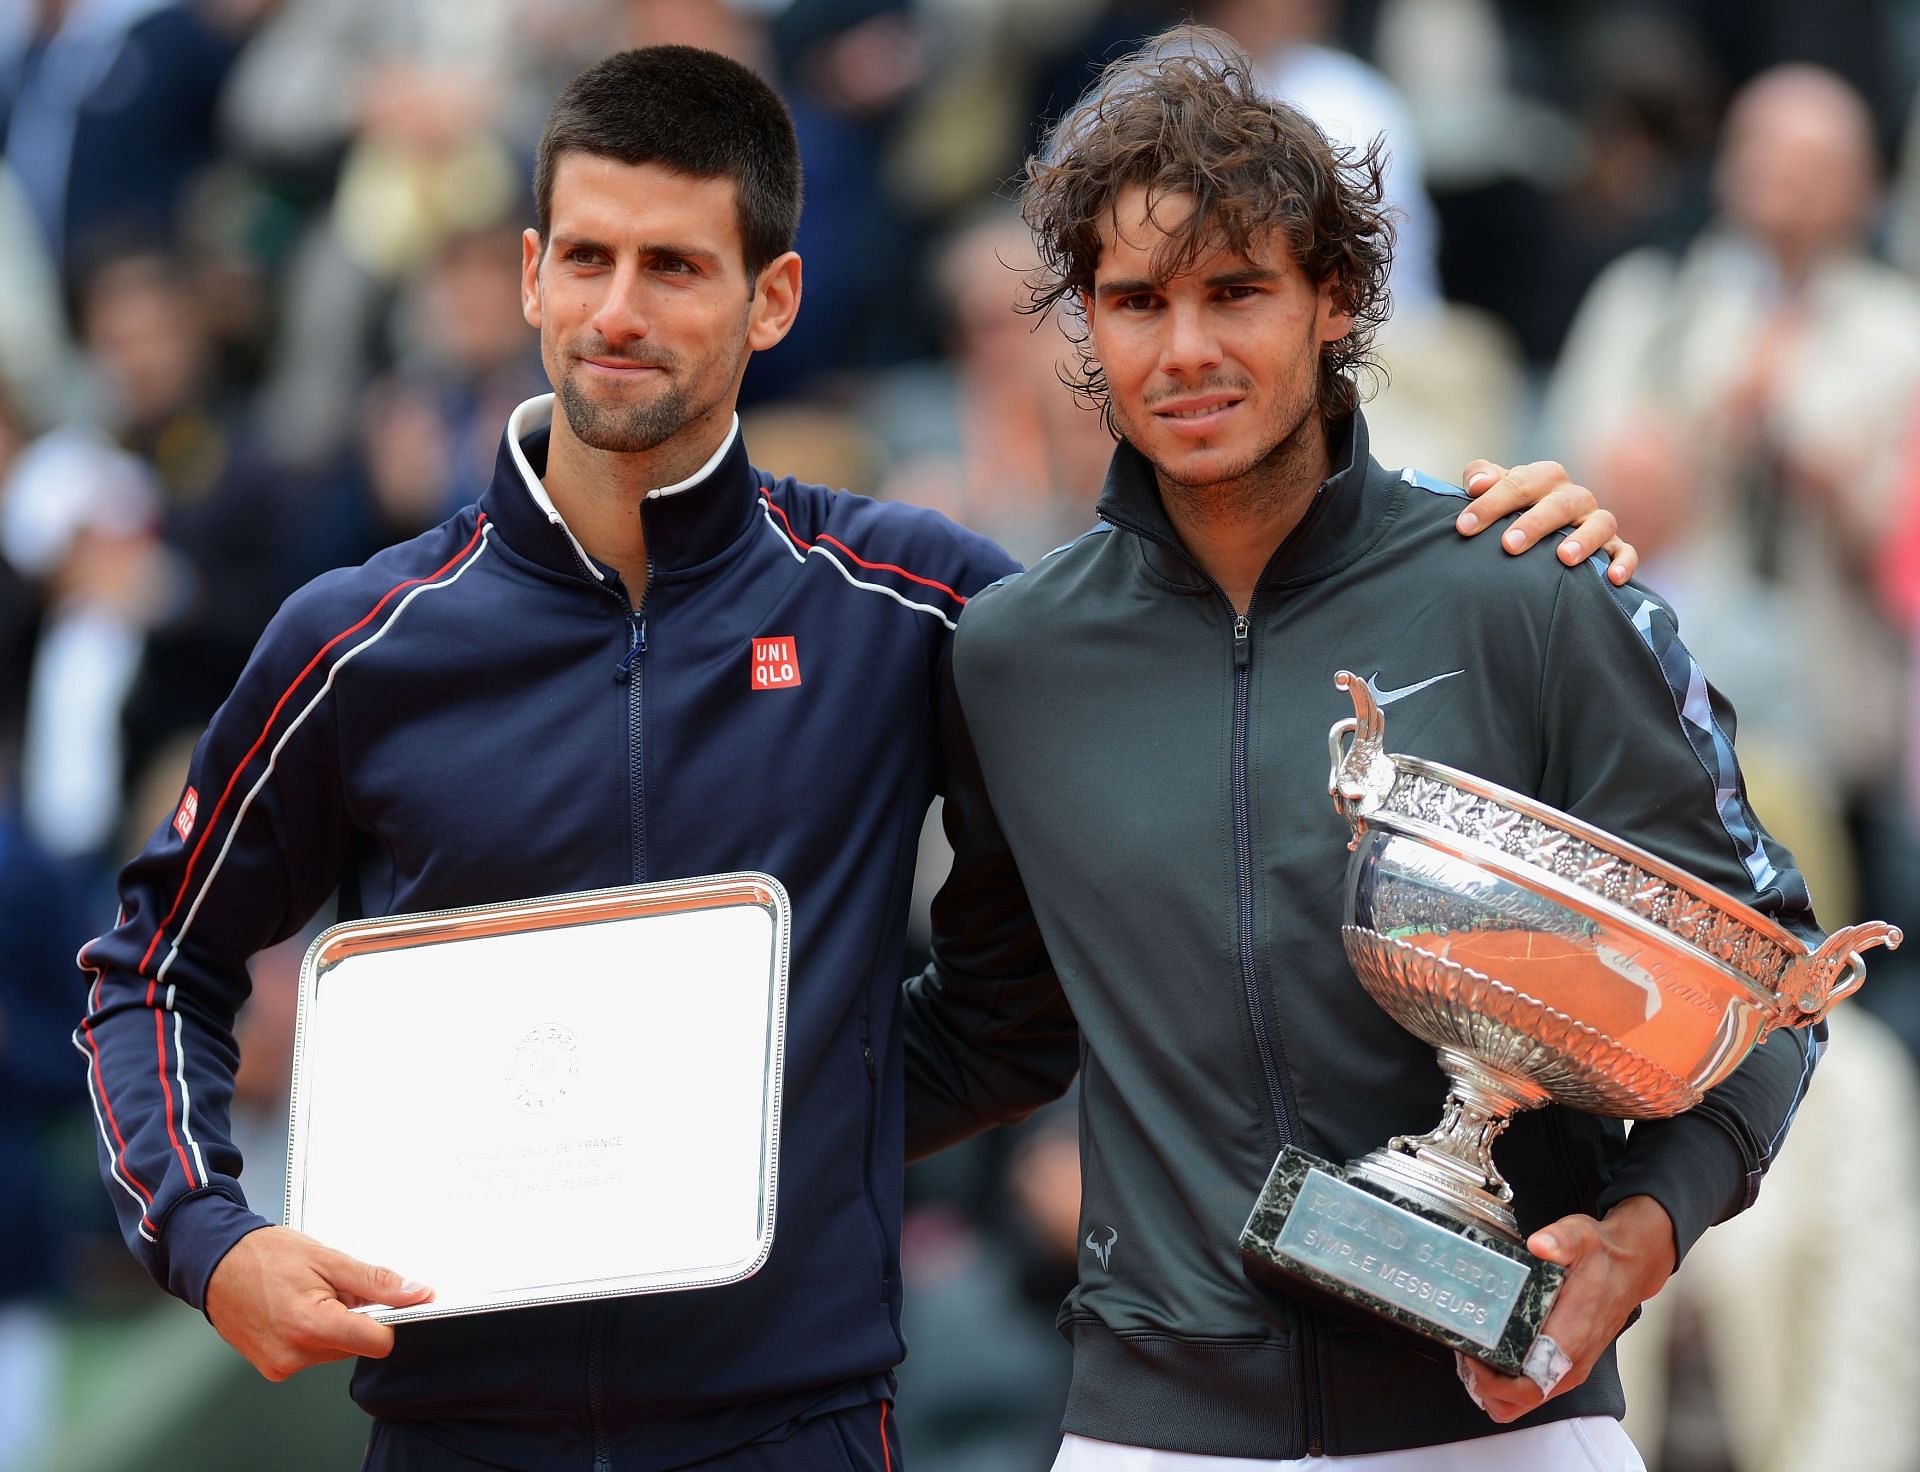 Djokovic and Nadal at the 2012 French Open